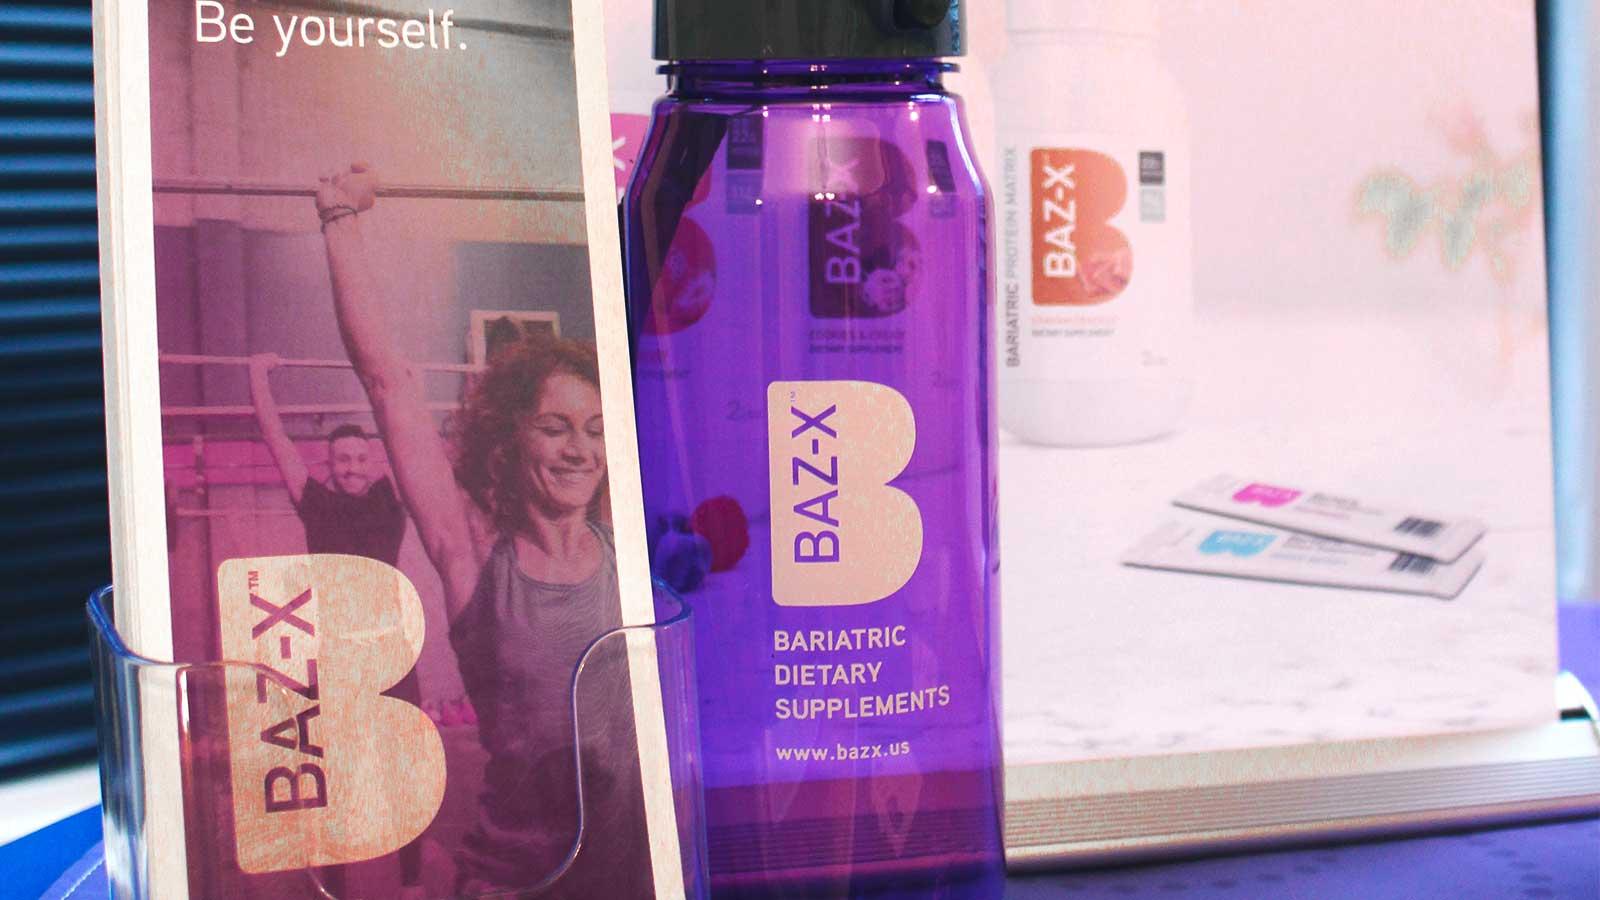 BAZ-X Bariatric Supplements | Promotional Display